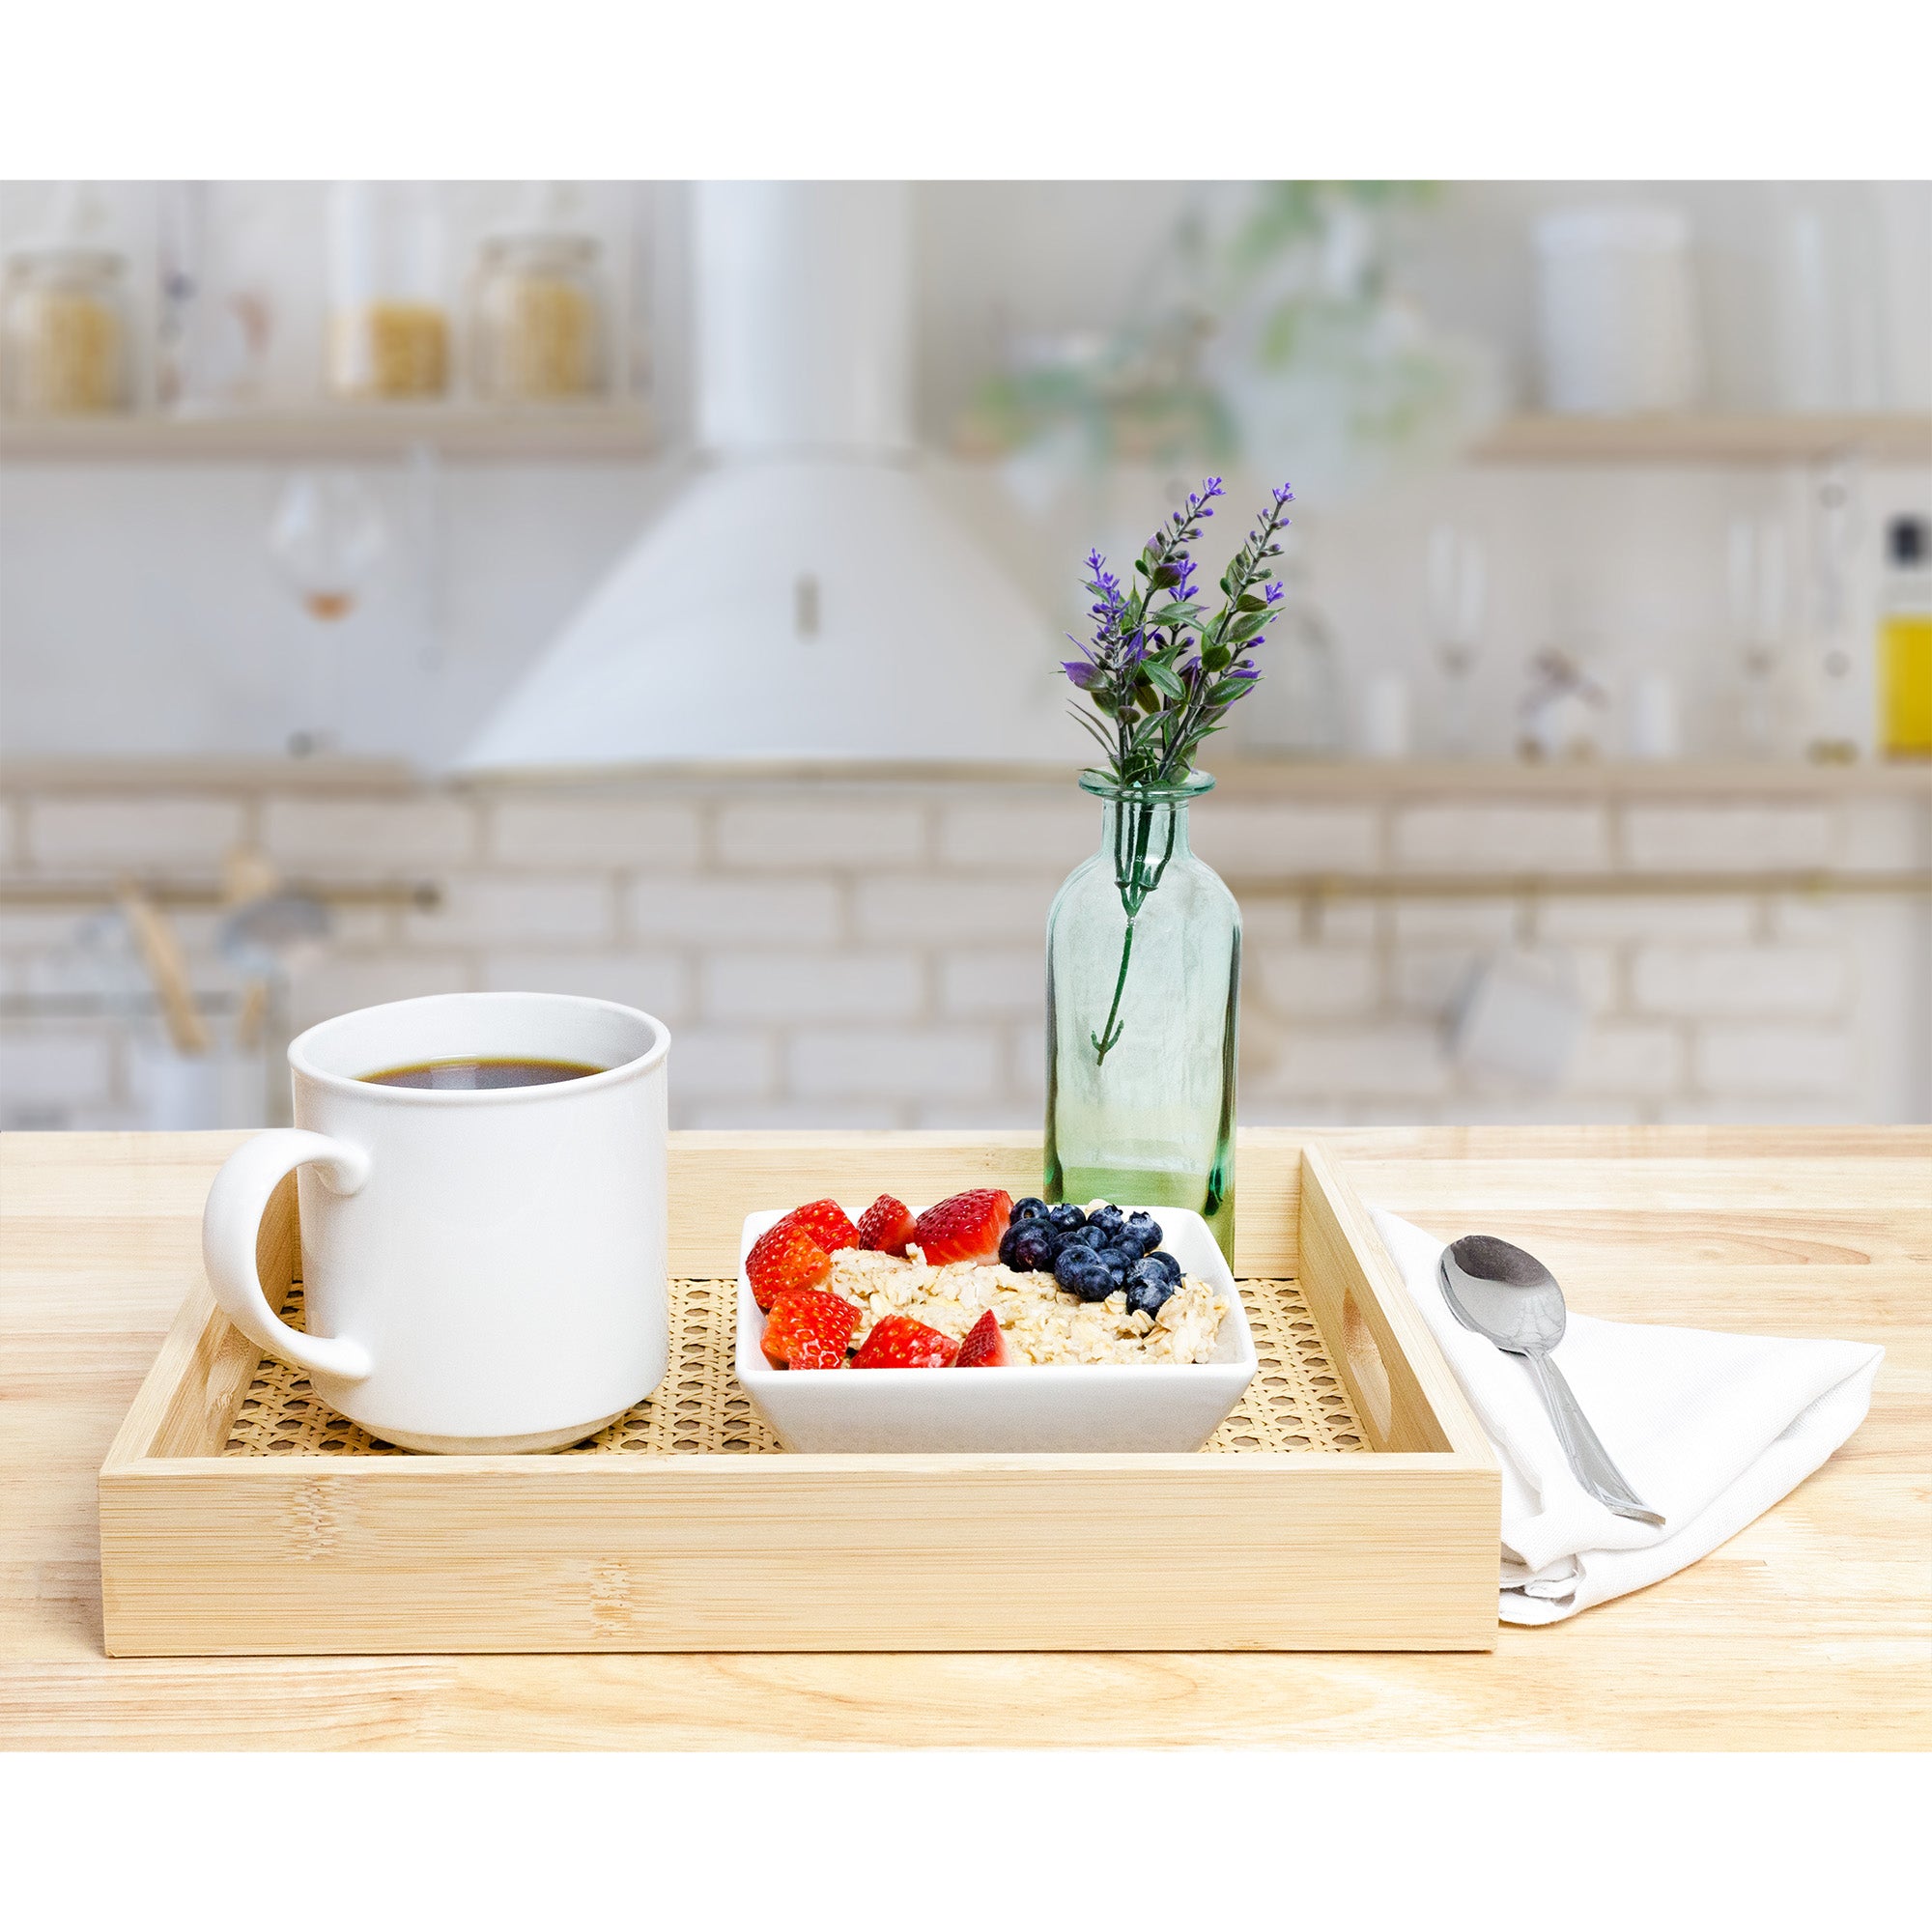 AuldHome Enamelware Farmhouse Snack Caddy (White); Rustic